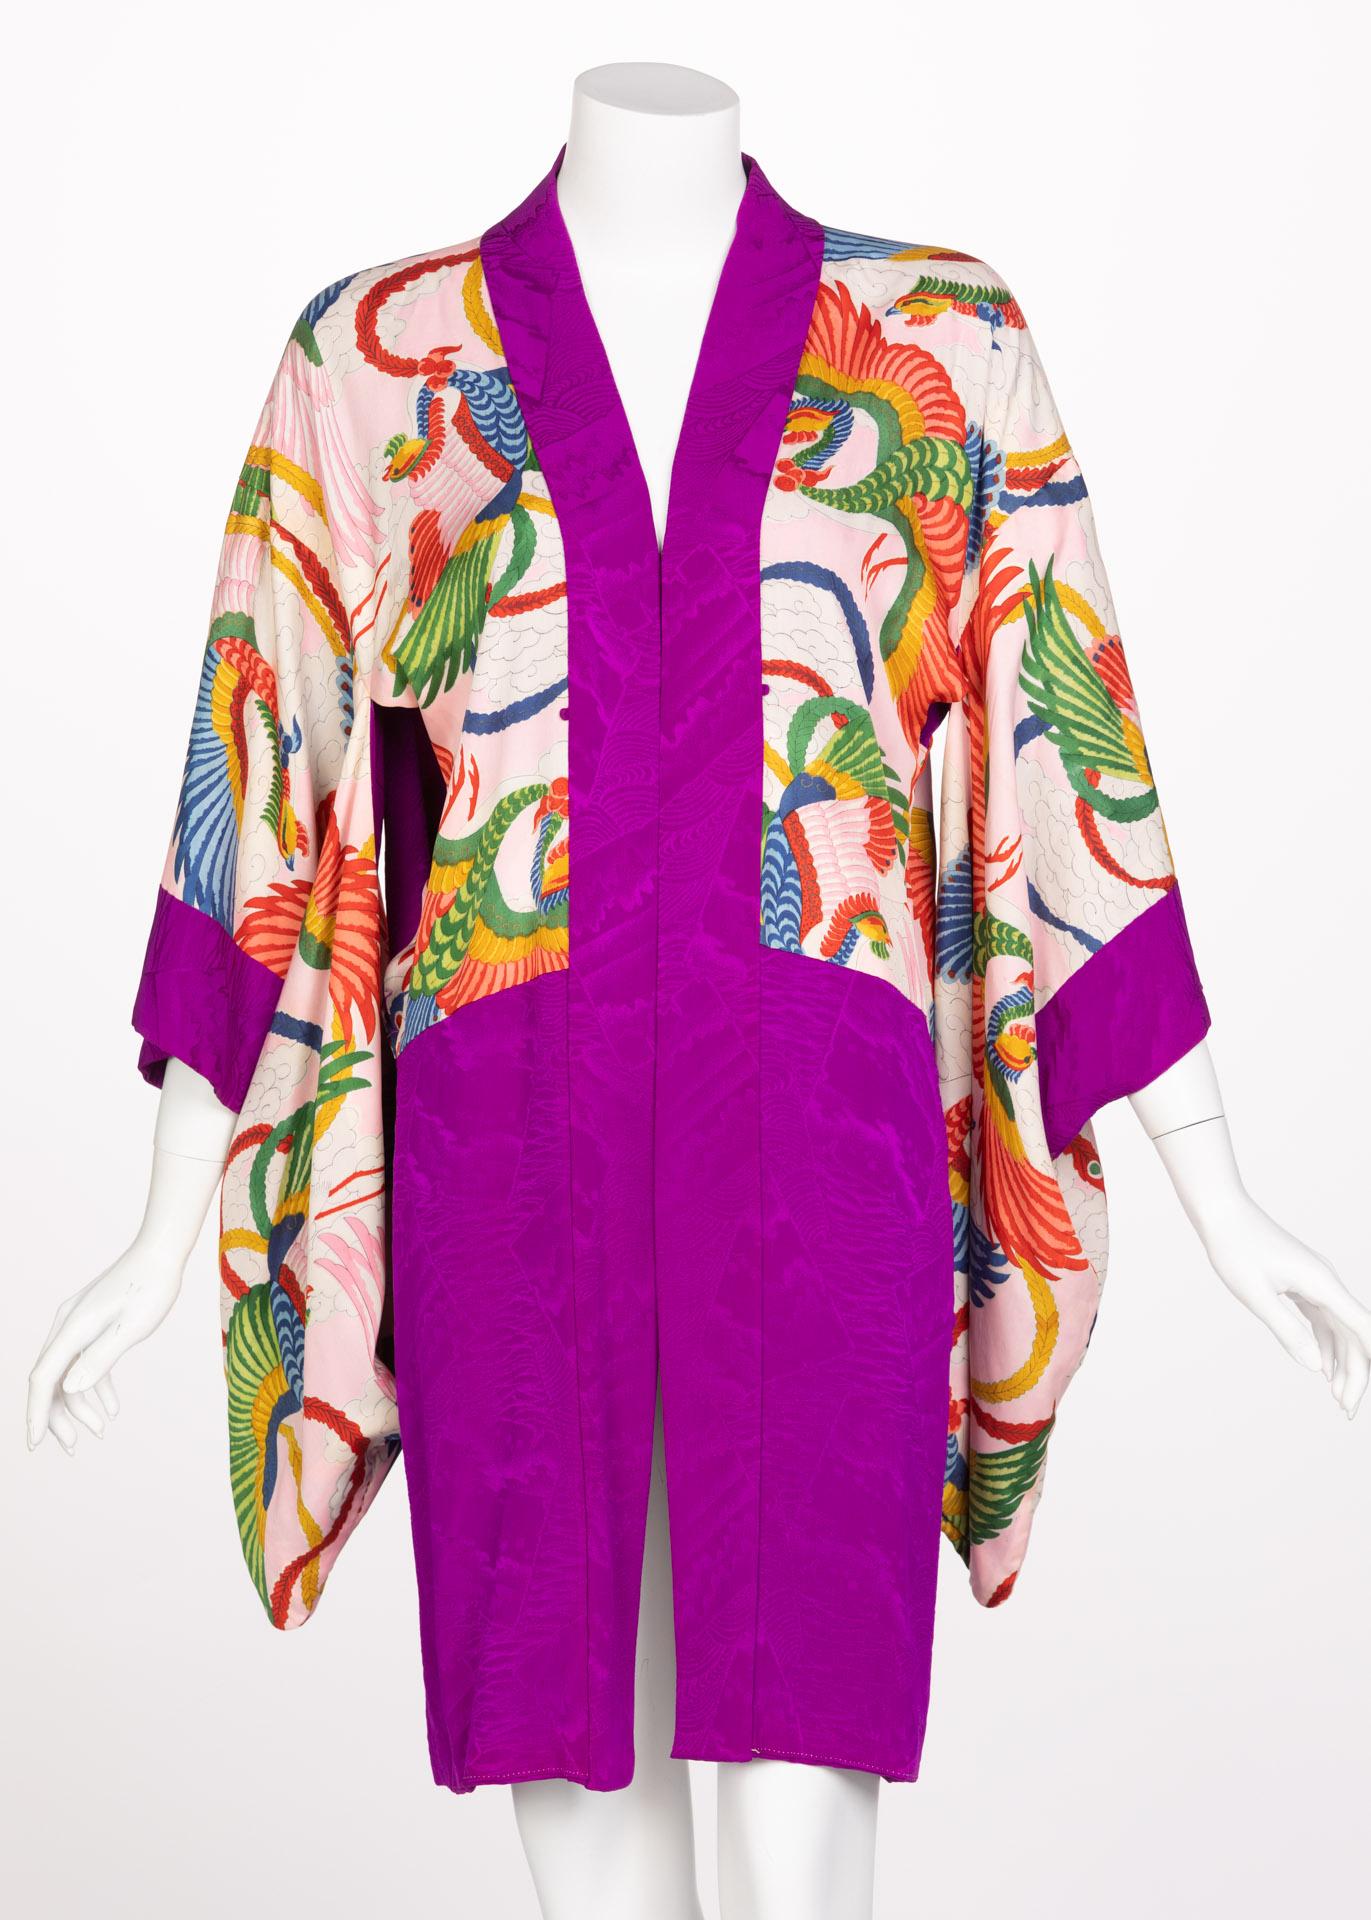 Widespread ideas about globalization were characteristic of the 1970s. Combined with the new fashion movements that relied on the use of vivid color, inspiration from Japanese dress fit this aesthetic. The traditional Japanese kimono, often